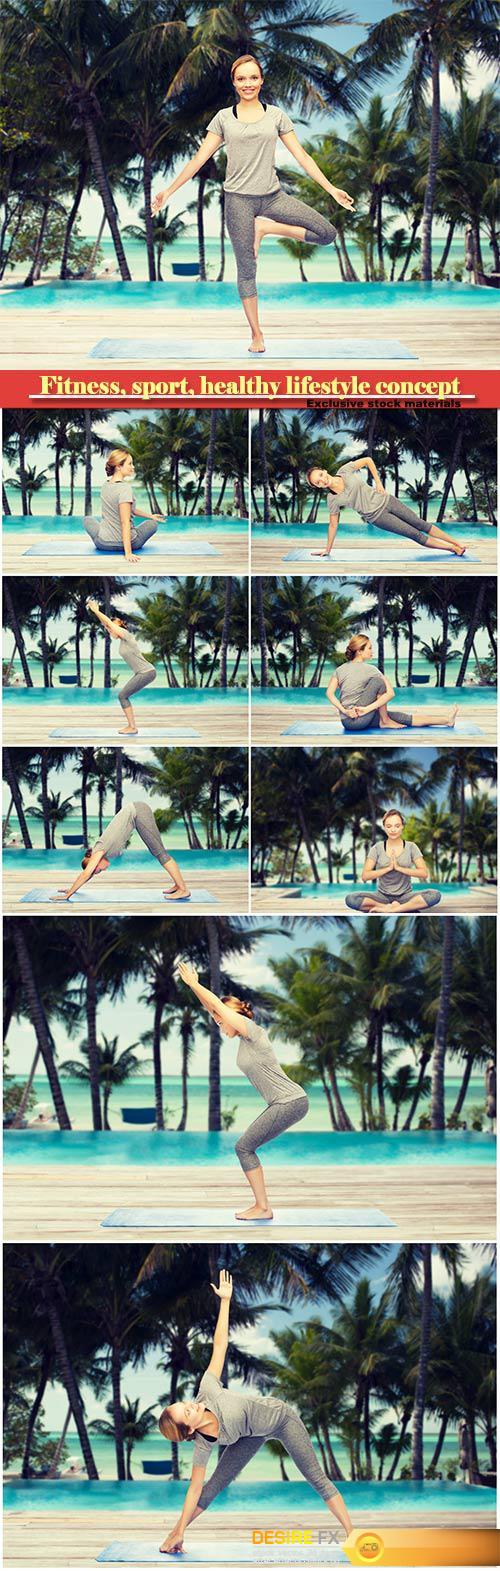 Fitness, sport, healthy lifestyle concept, woman making yoga